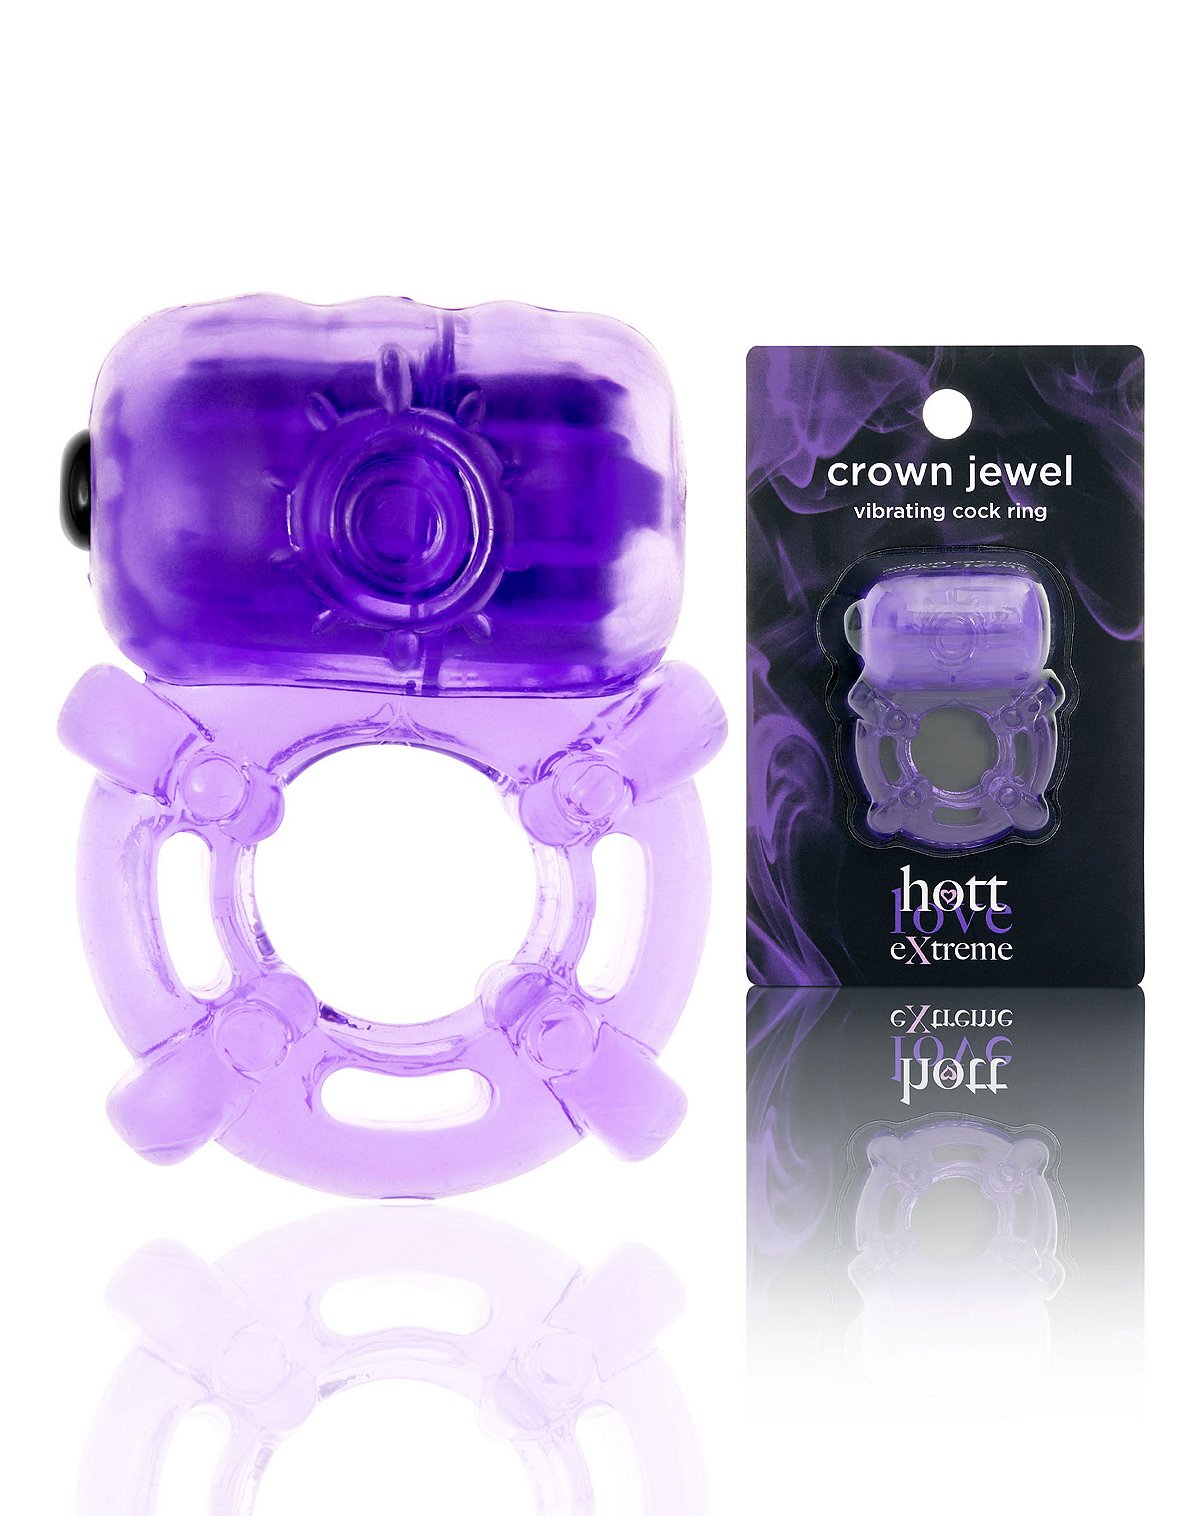 Crown Jewel vibrating cock ring - Hott Love Extreme